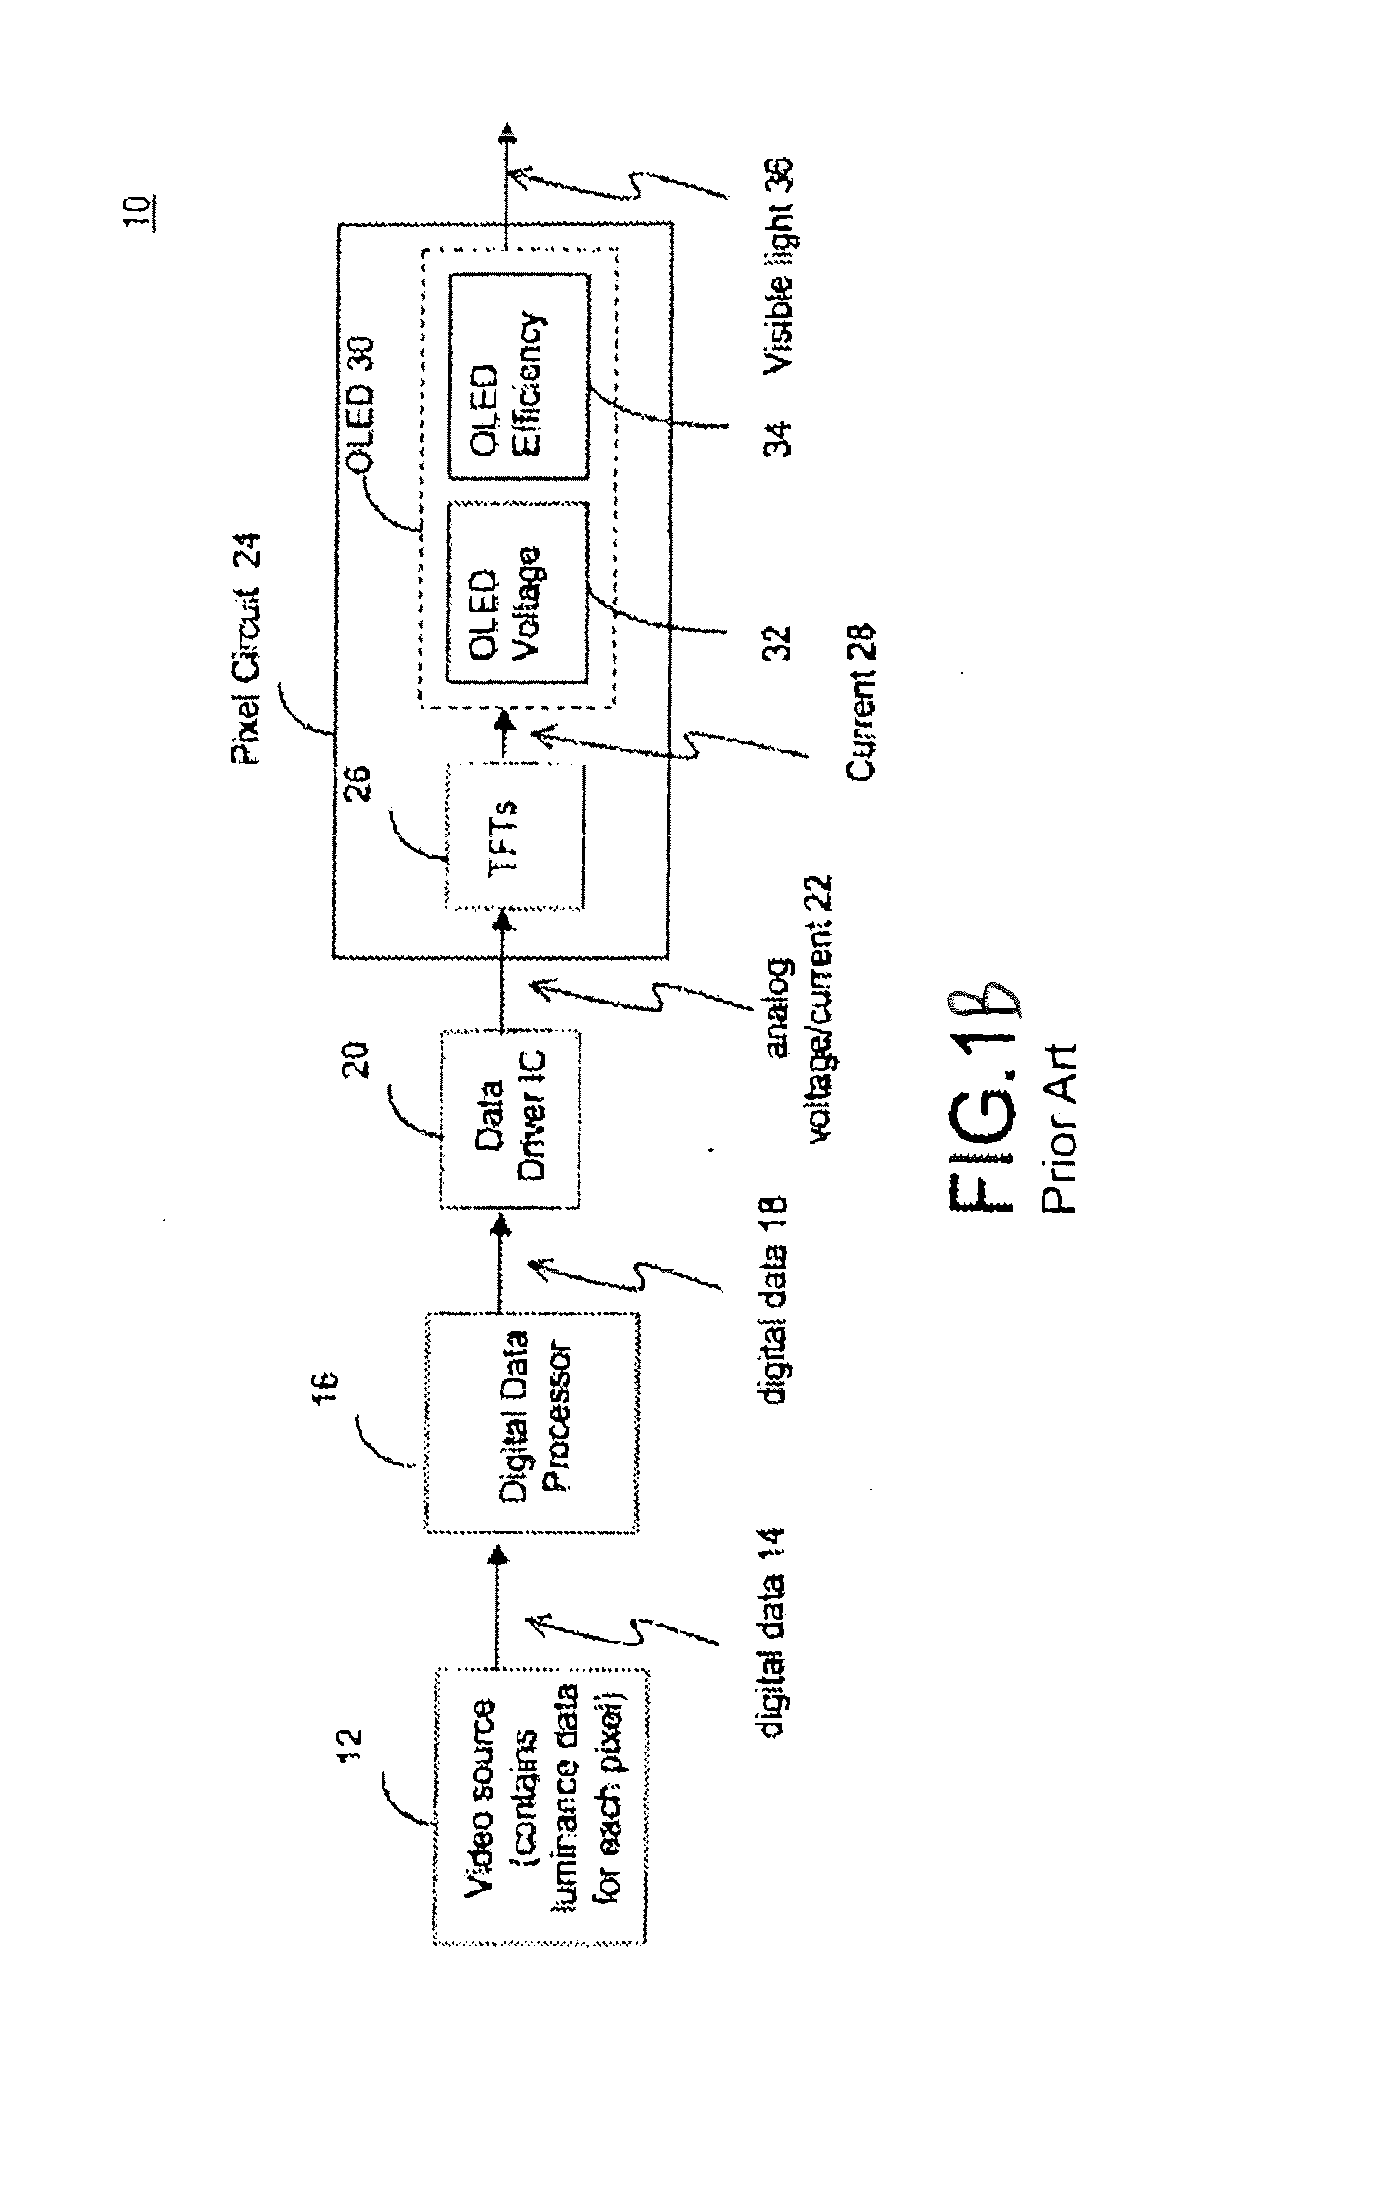 Method and system for programming, calibrating and/or compensating, and driving an LED display